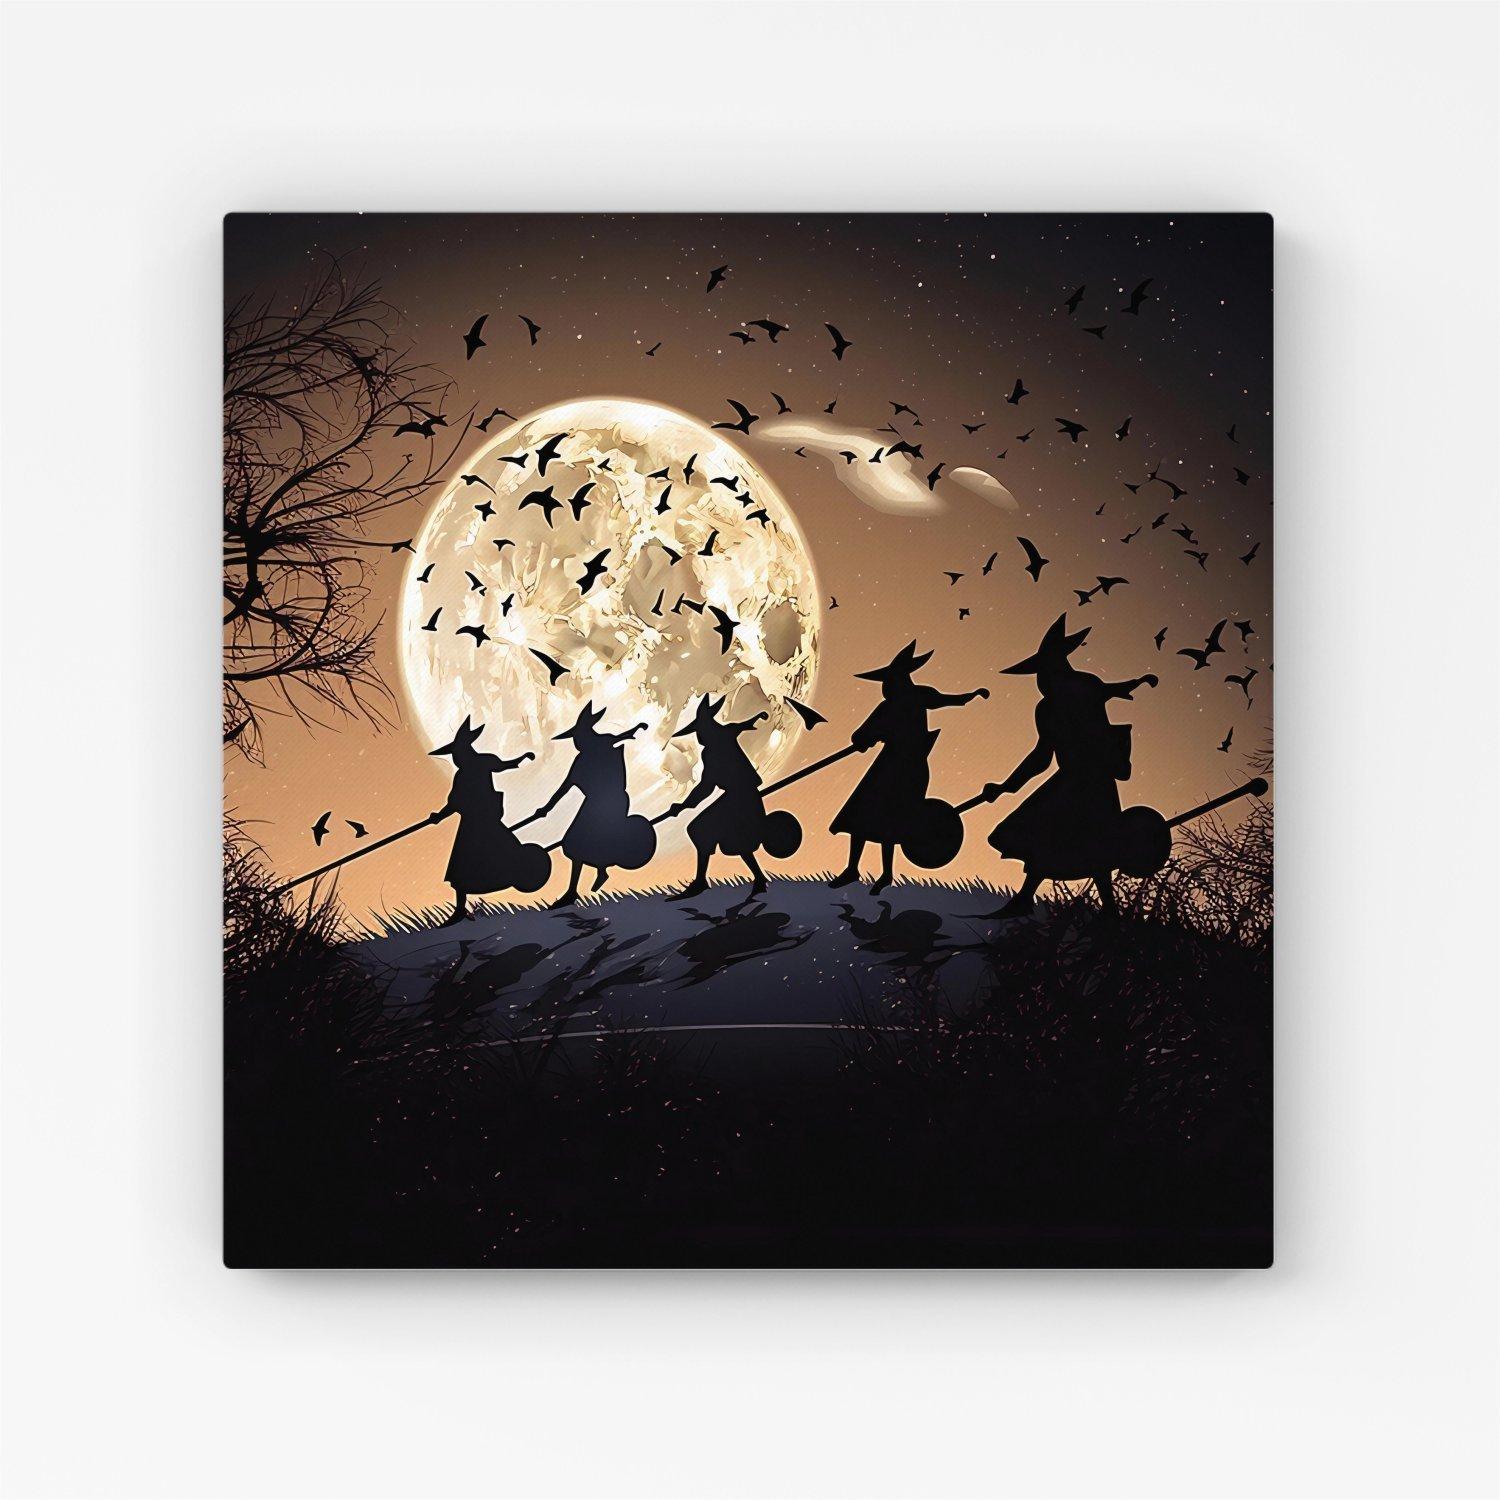 A Group Of Witches Riding Broomsticks Through The Night Canvas